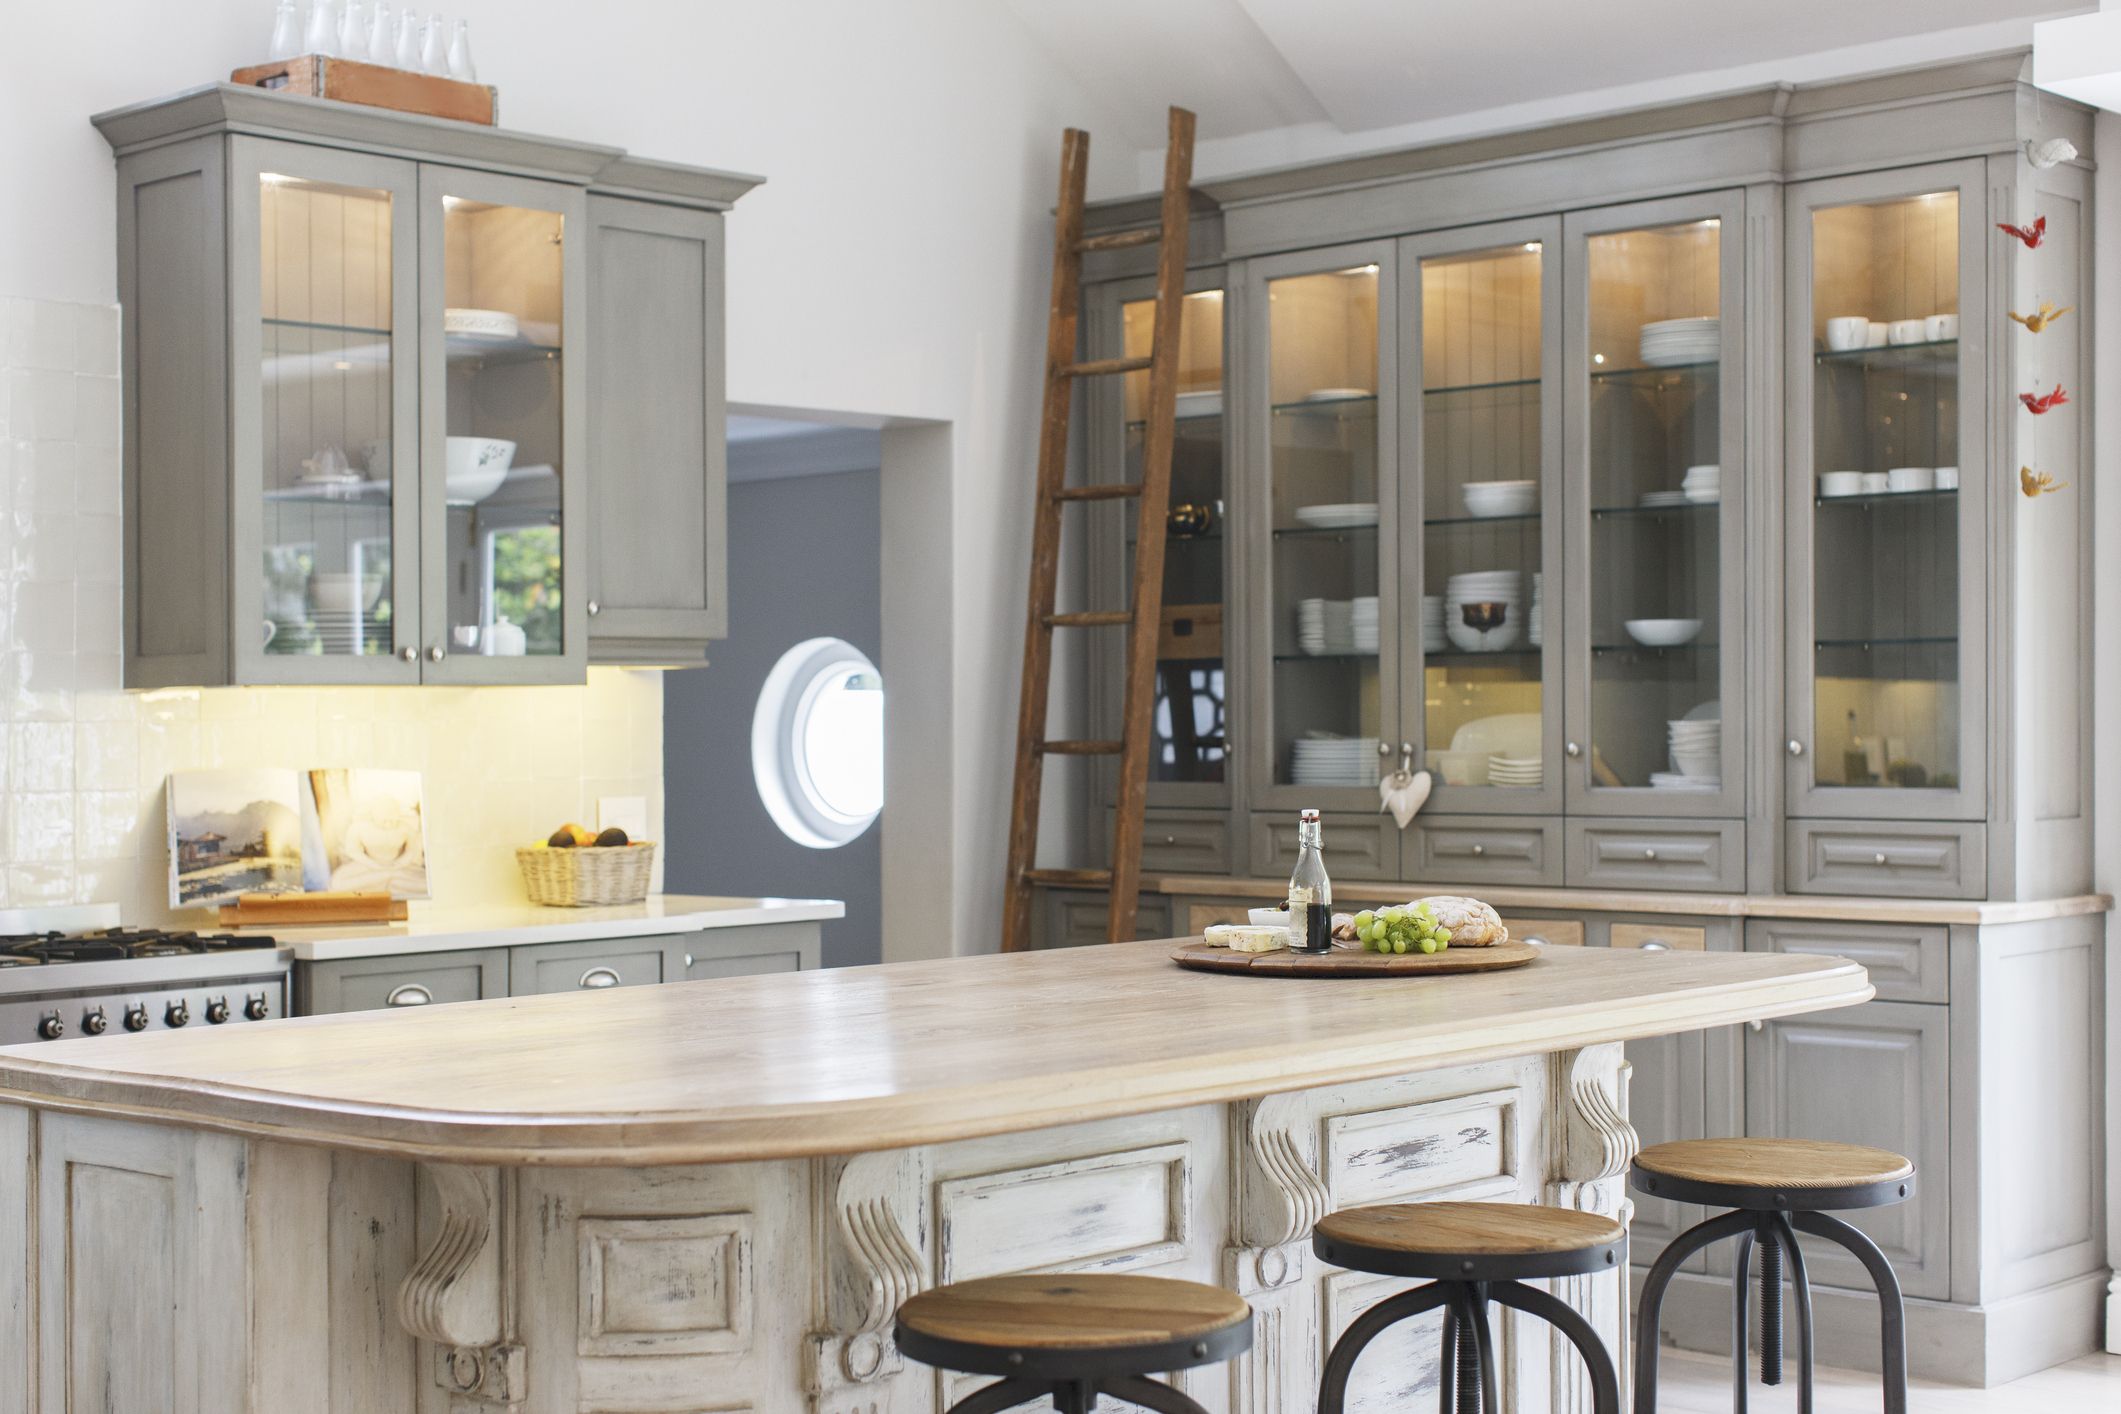 Kitchens Without Islands: 7 Alternatives To An Island Unit